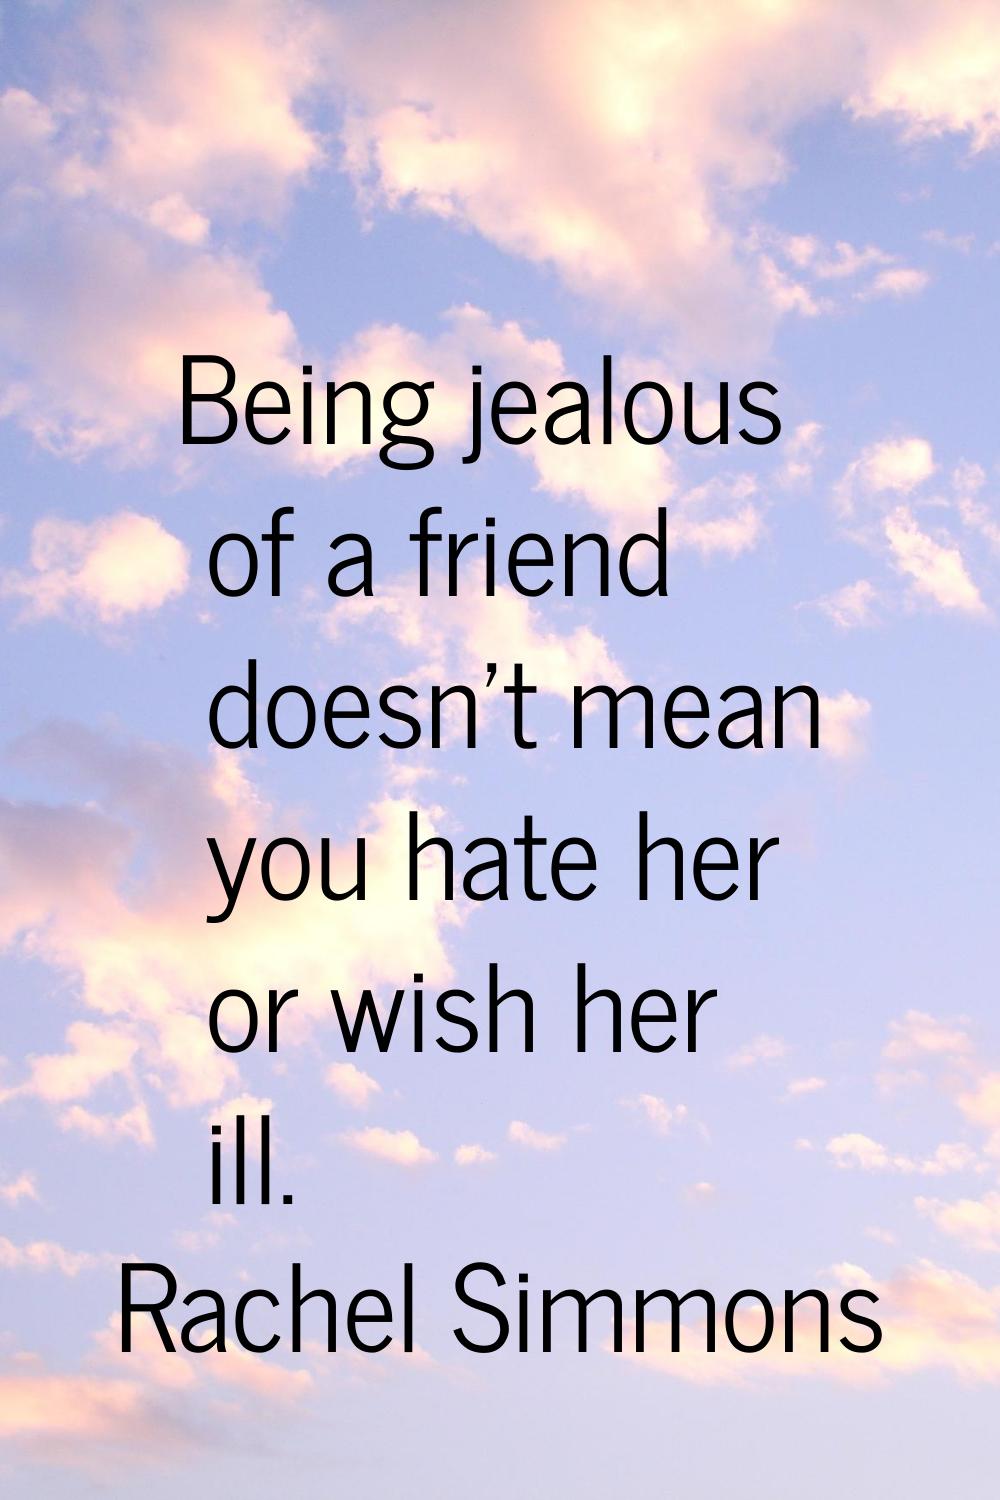 Being jealous of a friend doesn't mean you hate her or wish her ill.